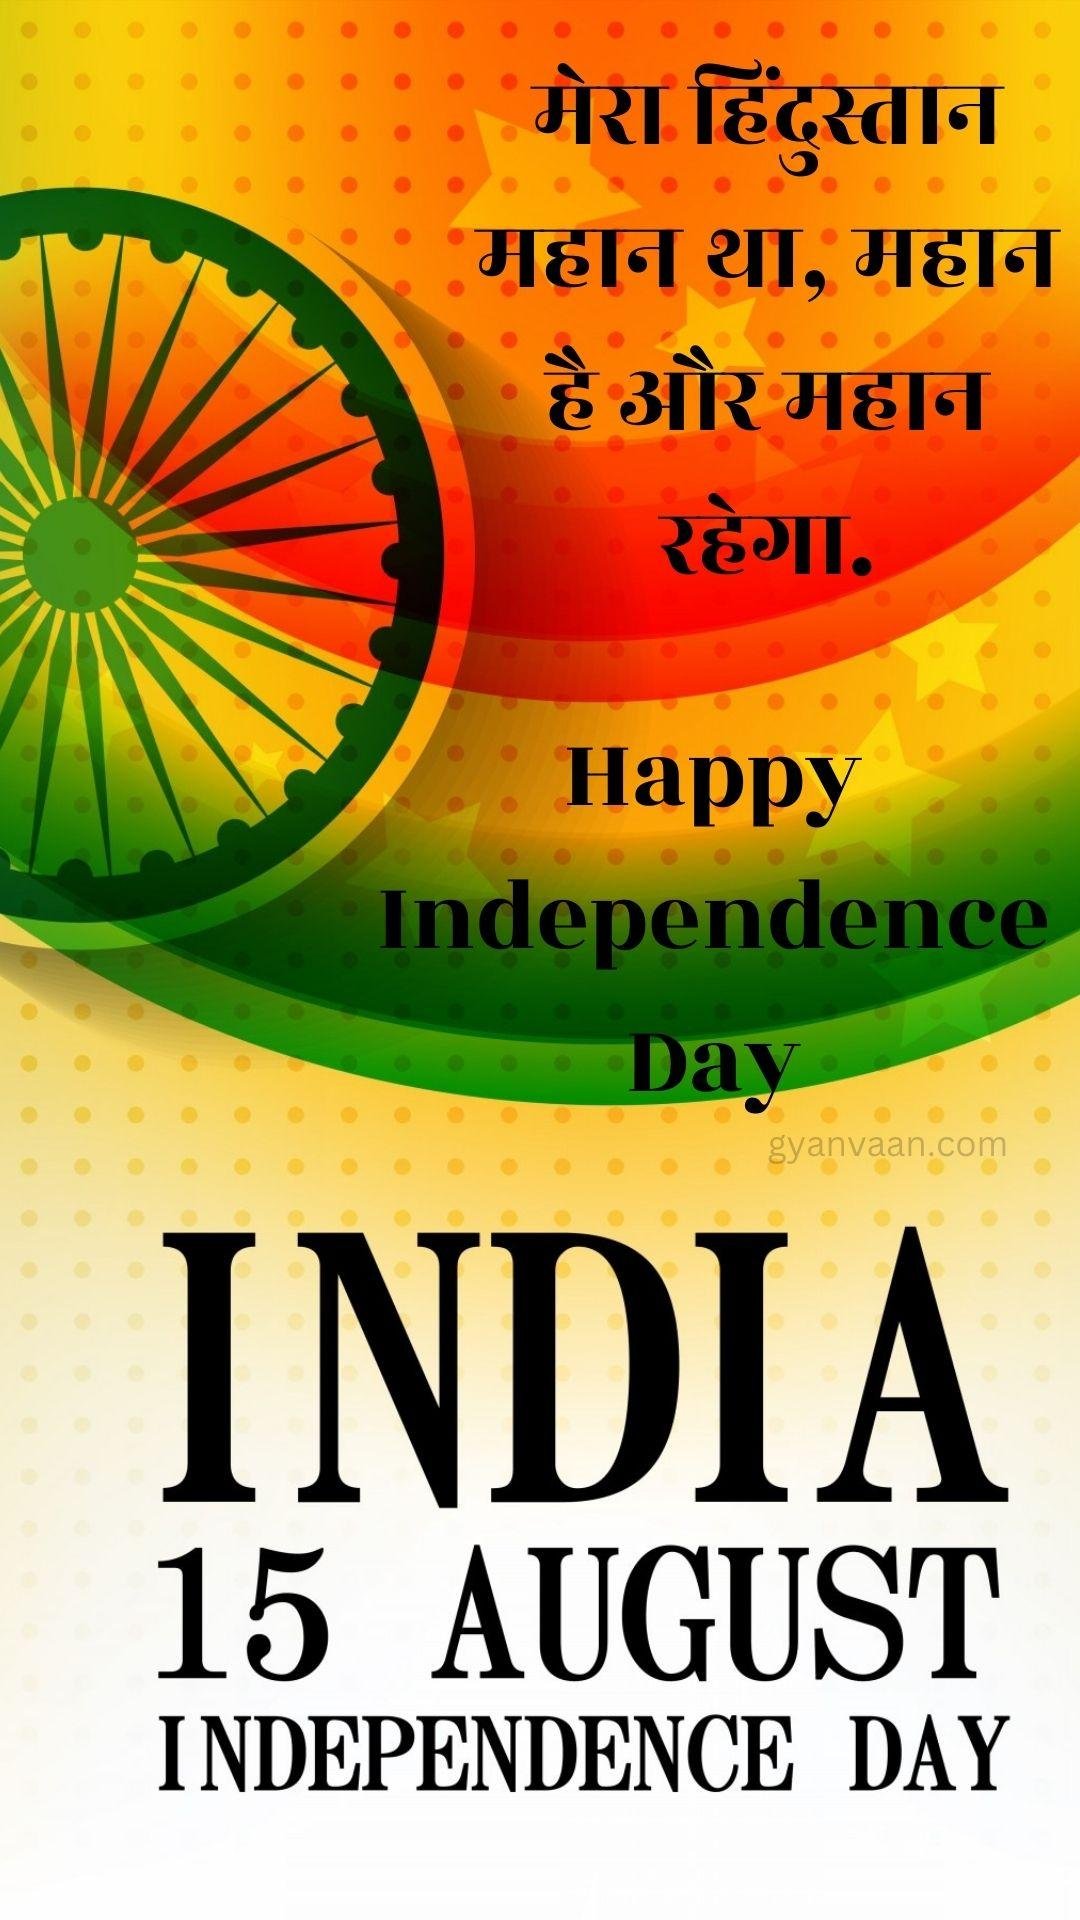 Independence Day Quotes In Hindi With Shayari Slogan Wishes For Whatsapp Status Mobile 45 - Independence Day Quotes In Hindi